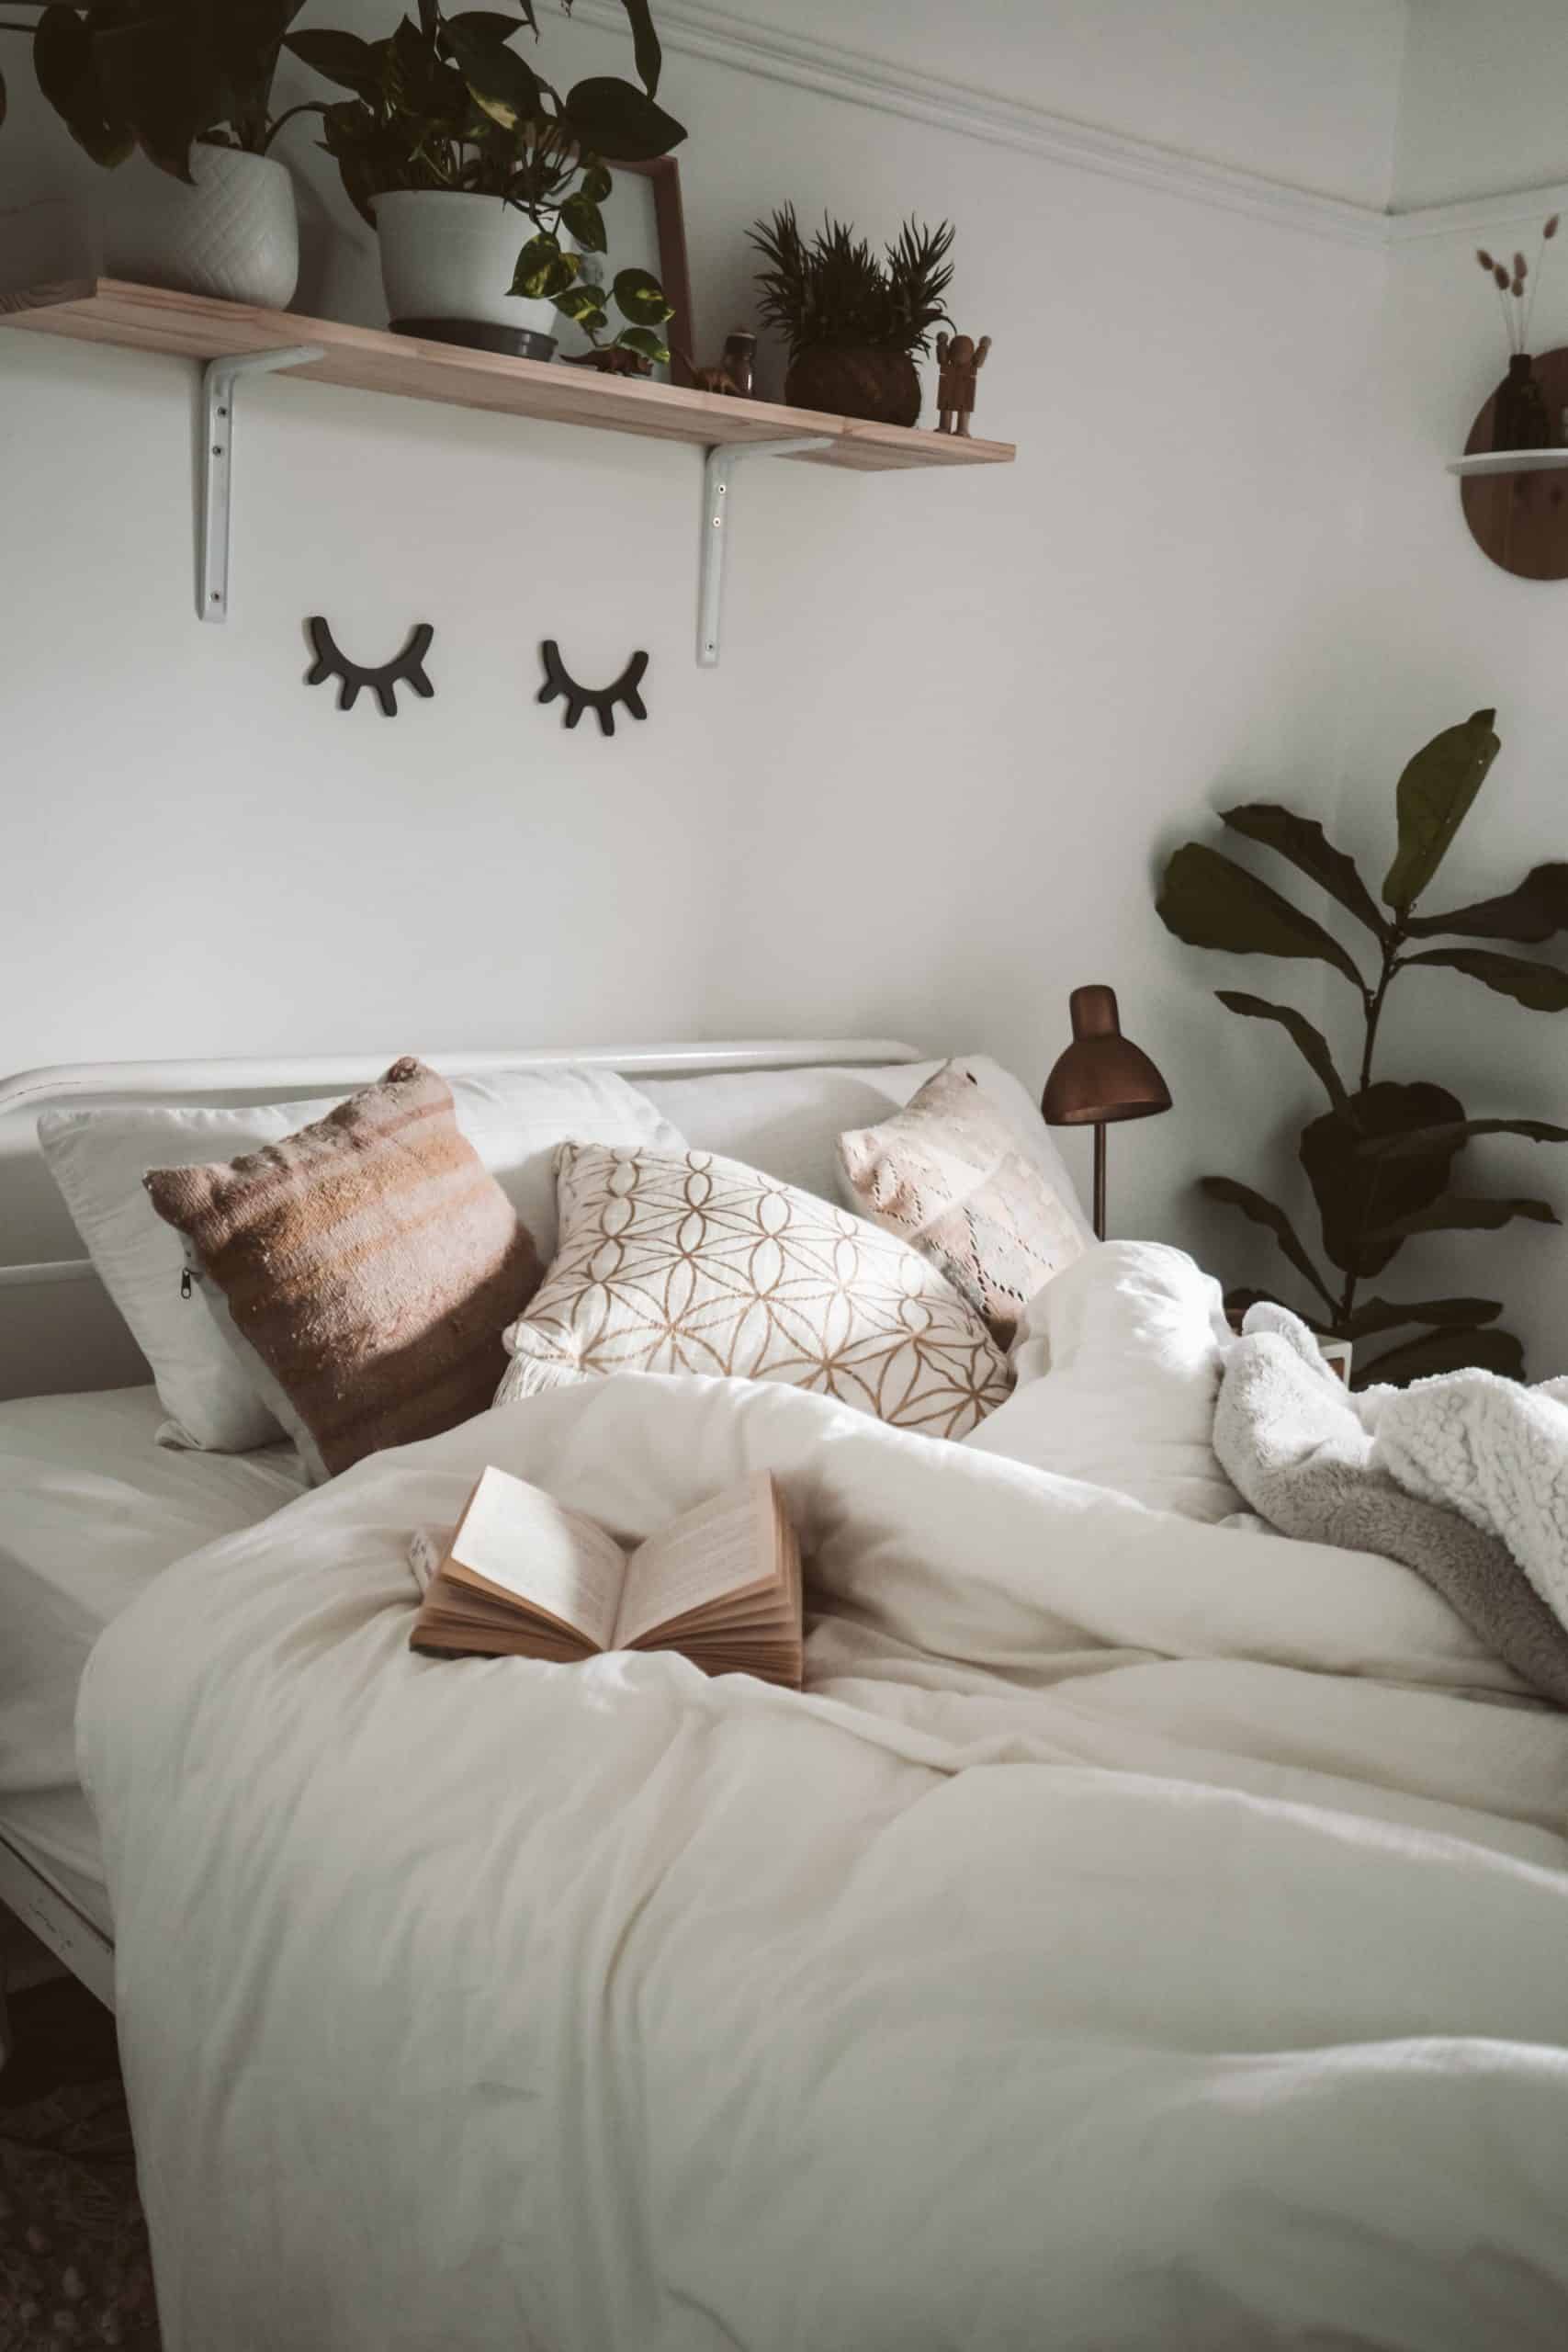 cozy home; picture of a bed with pillows and blankets, plants next to the bed, a lamp, wall decor, and a shelf with plants.